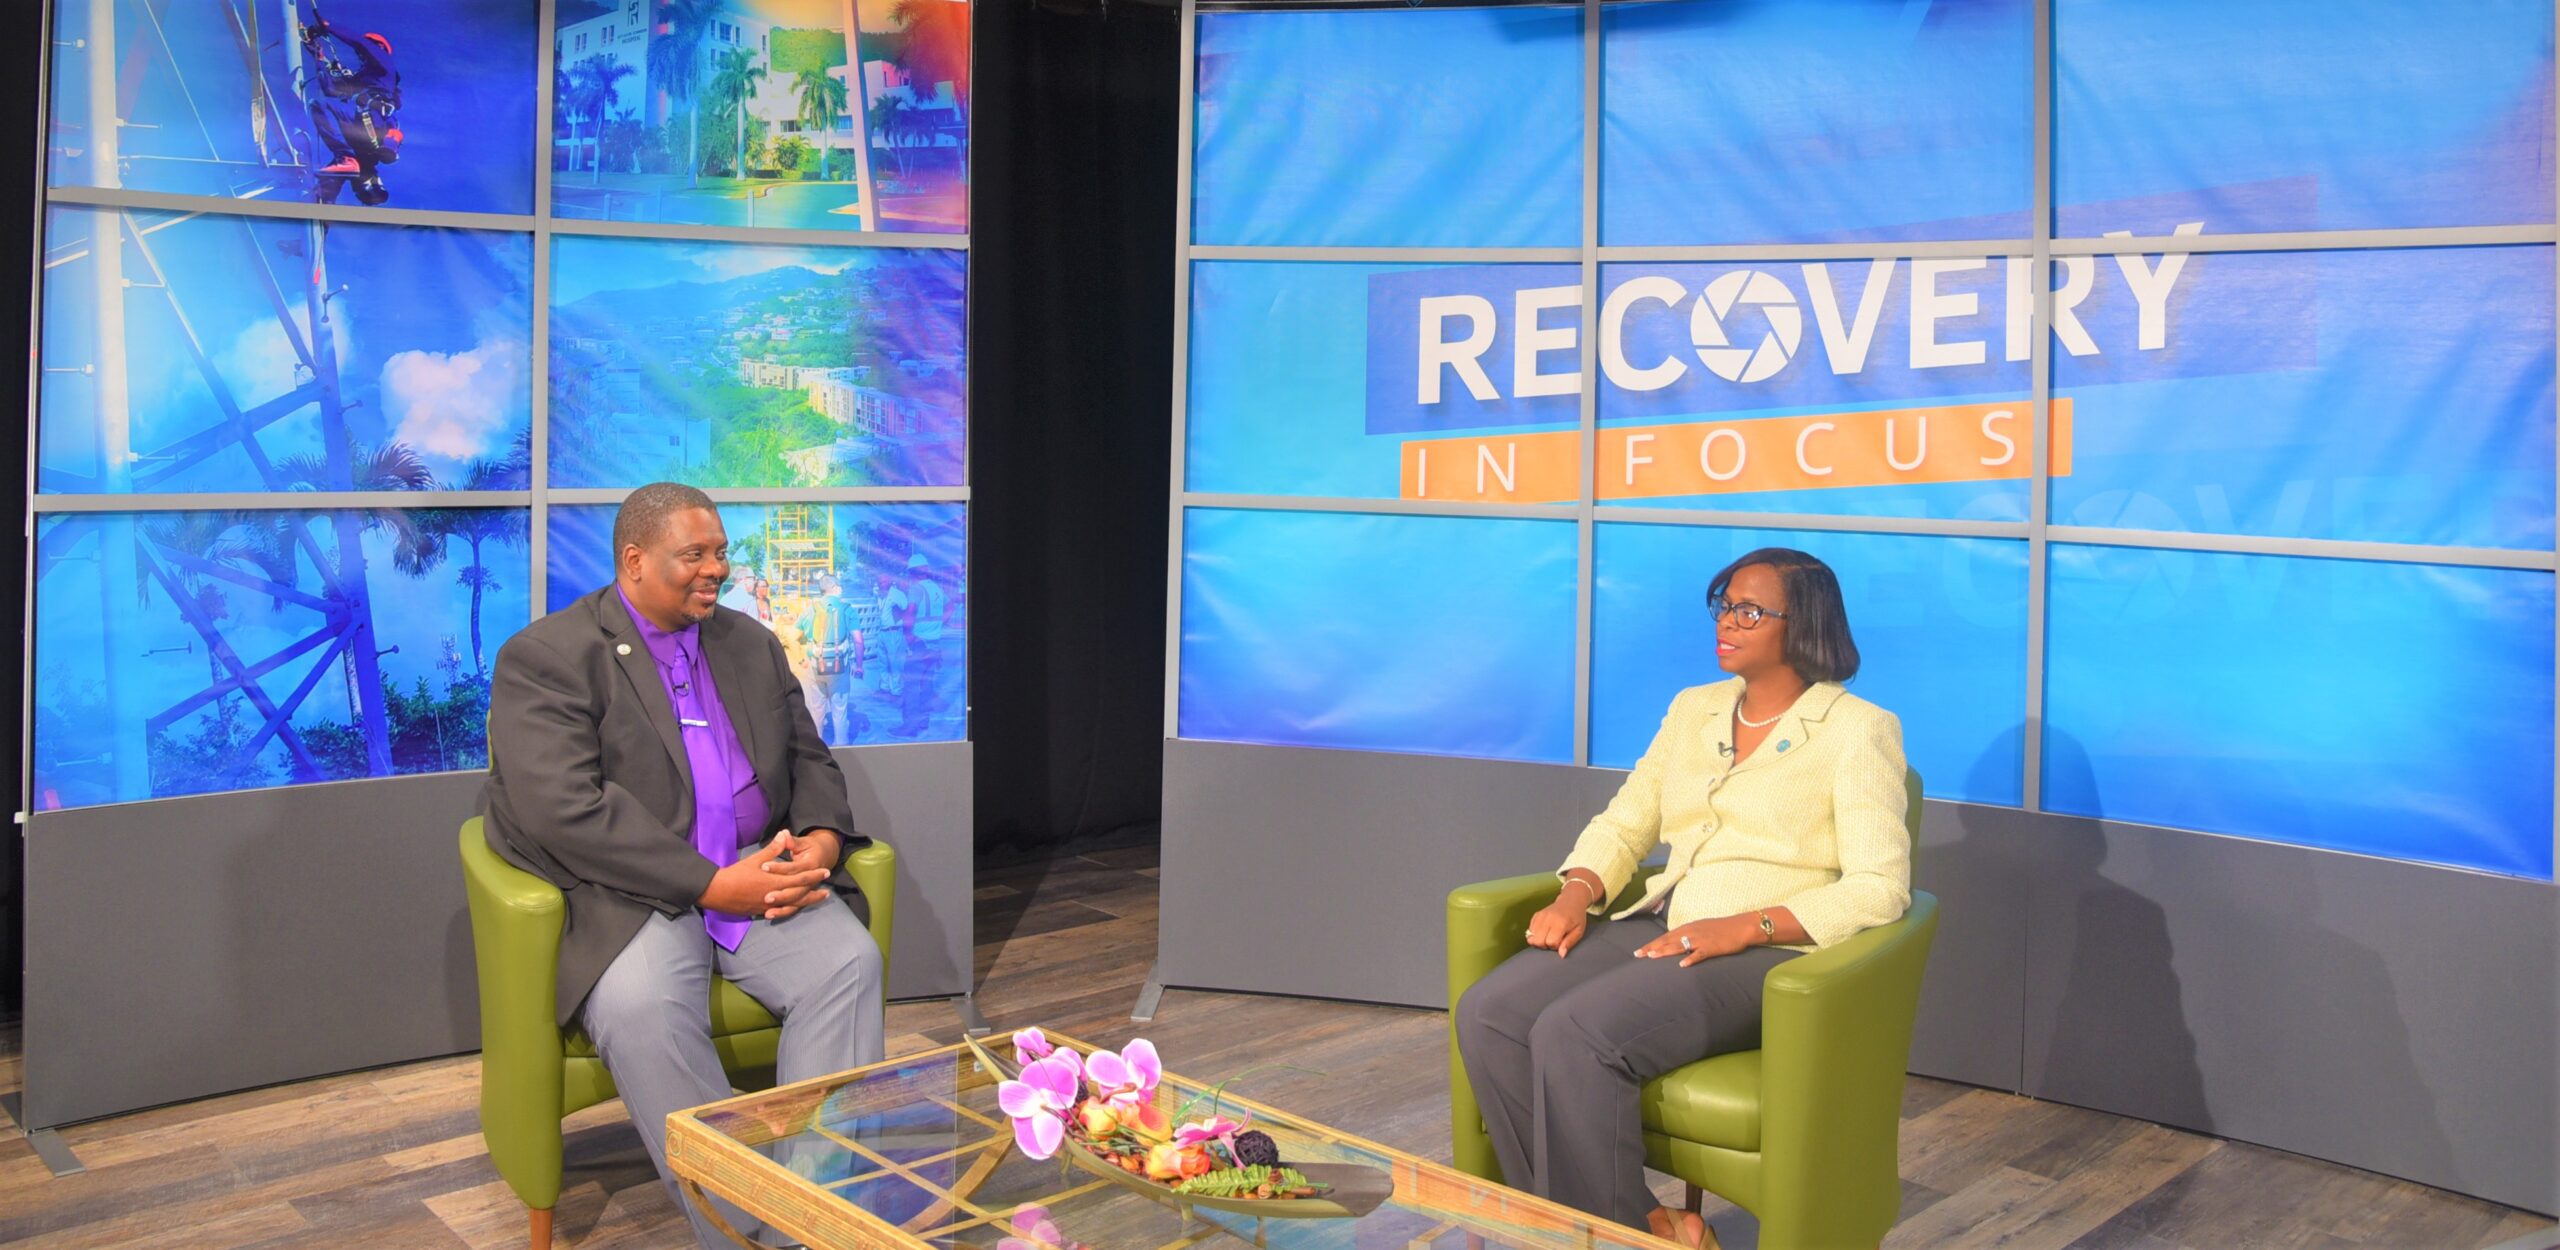 Recovery In Focus Features An Update On Territory's Schools Tonight On WTJX